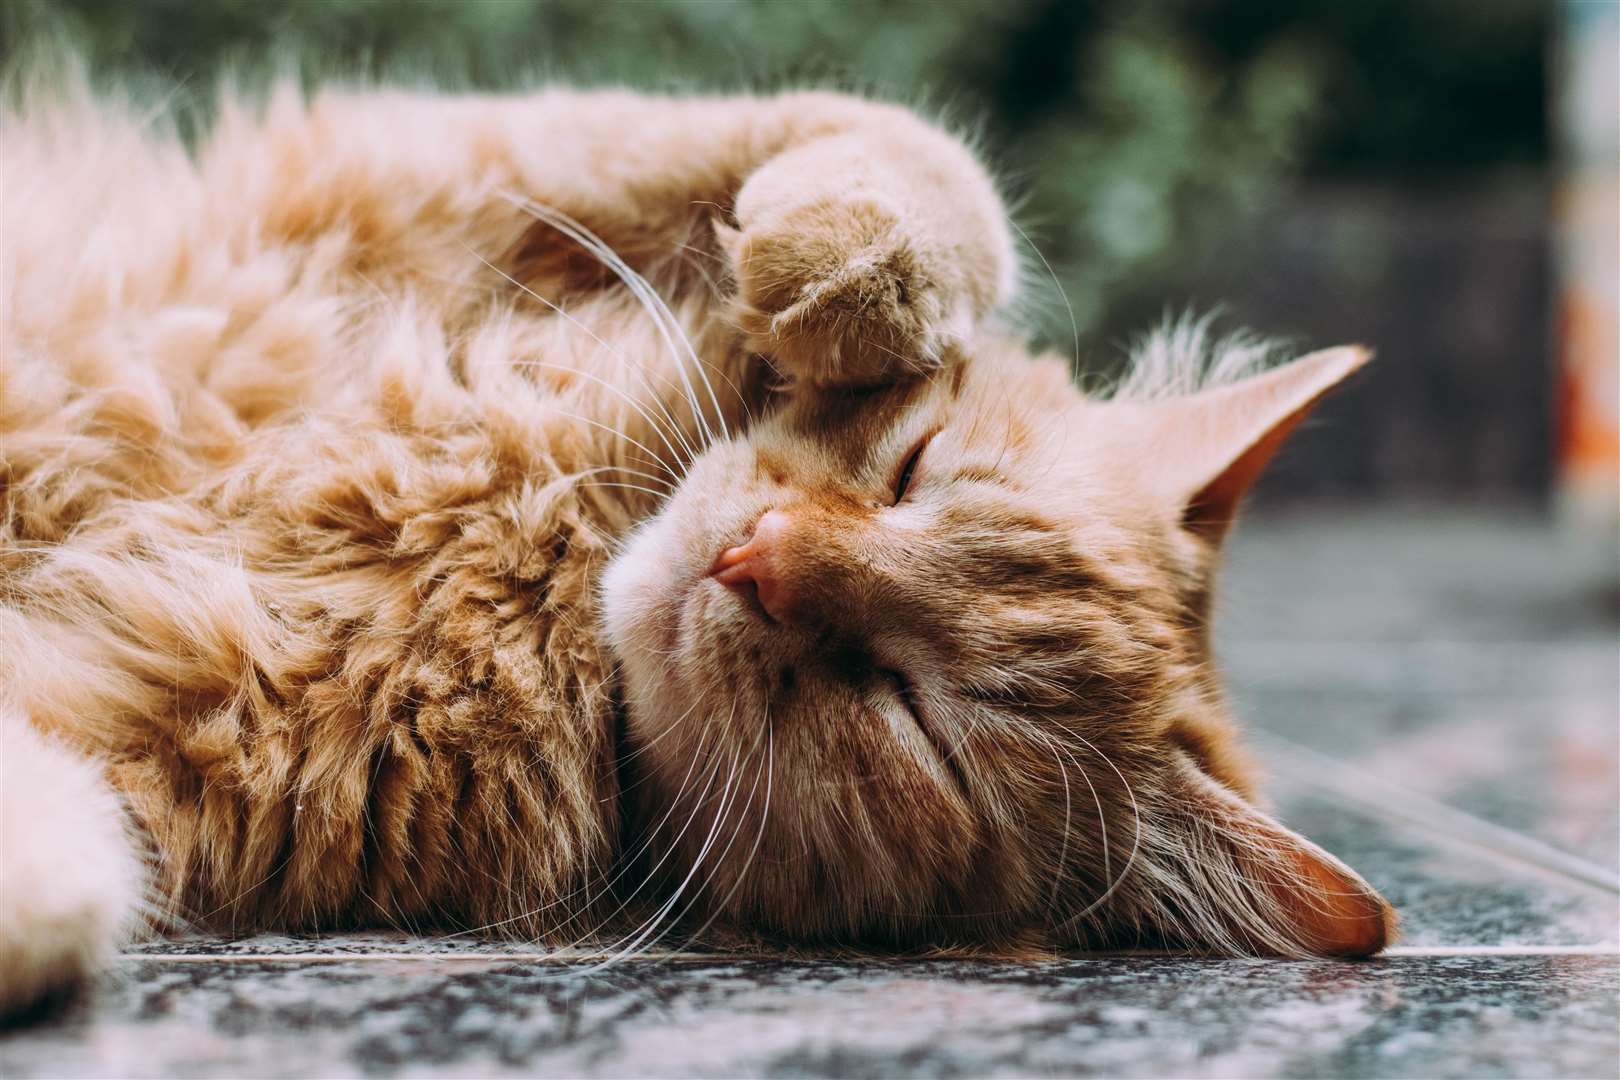 You should ensure your cat has a variety of cosy places where they can curl up and relax. Picture: Ludemeula Fernandea, unsplash